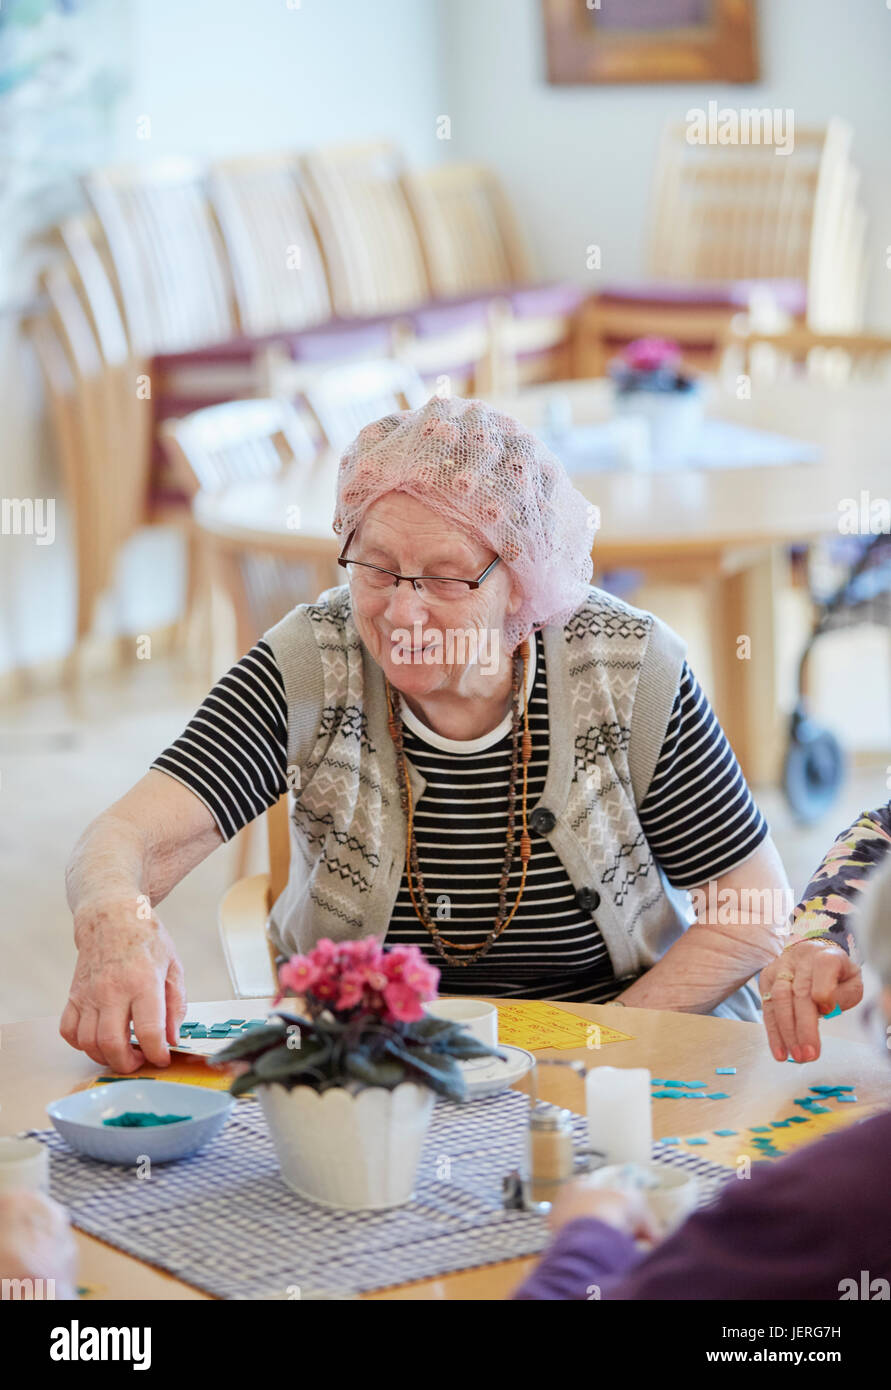 Senior woman in care home Stock Photo